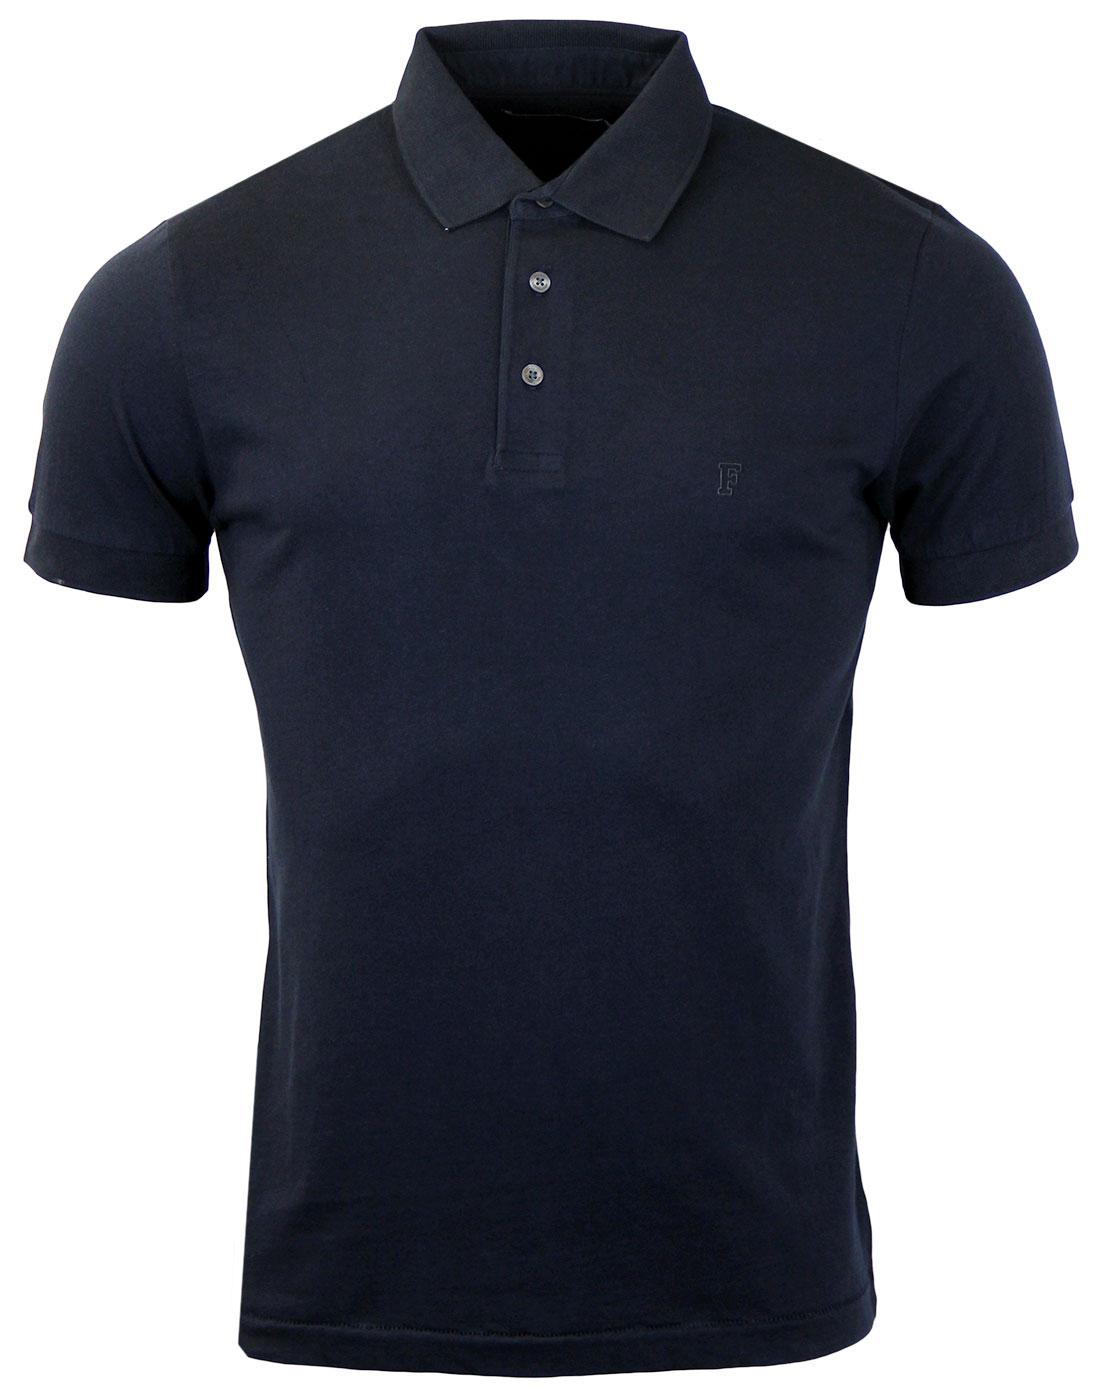 FRENCH CONNECTION Sneezy Retro Mod Jersey Polo Shirt in Marine